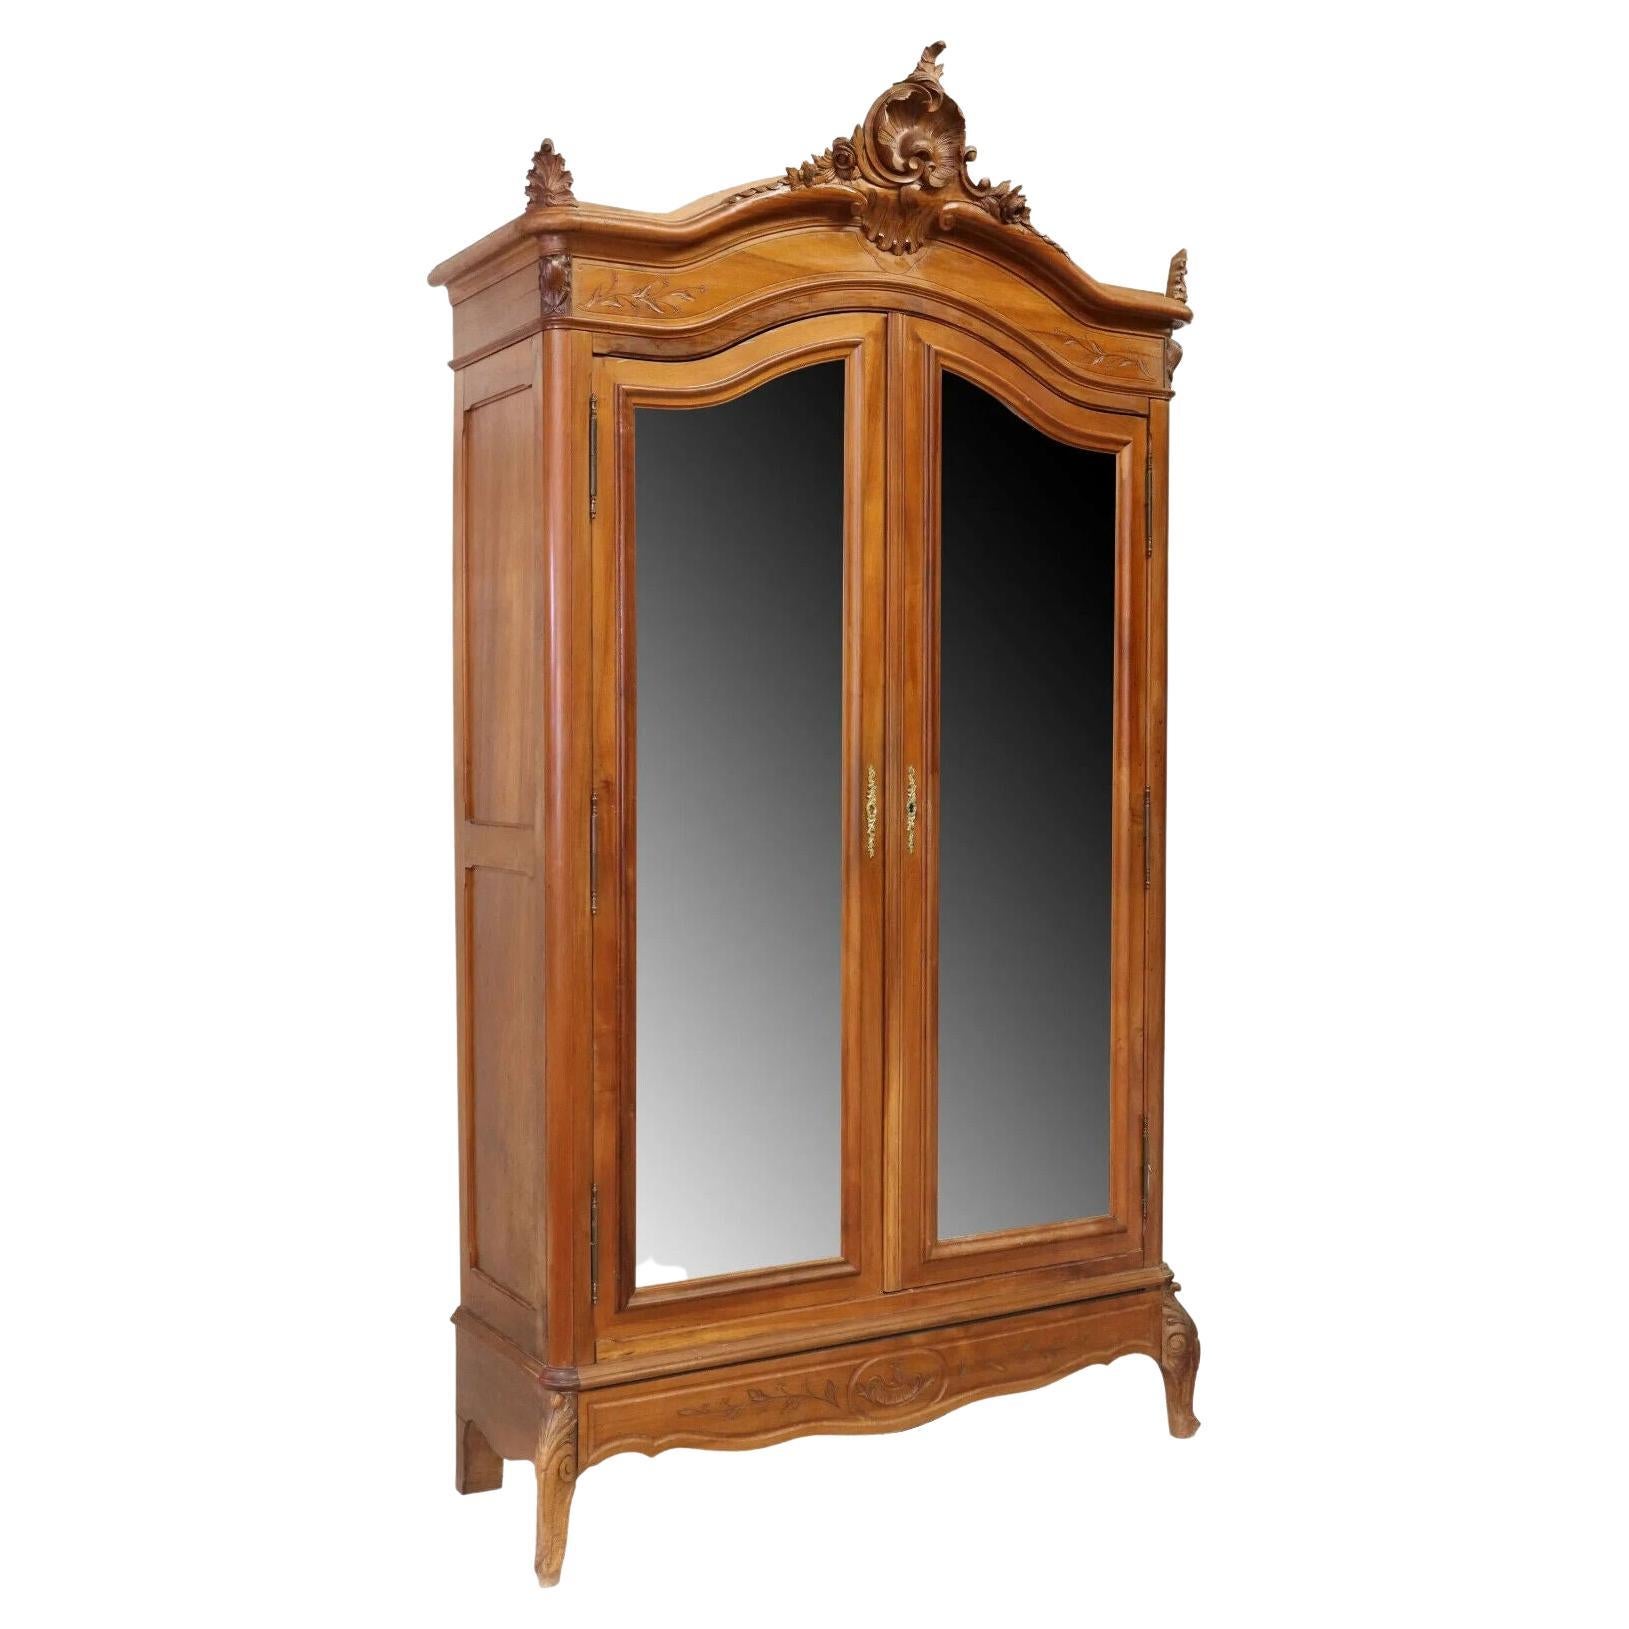 Early 1900s Antique Louis XV Style Walnut Mirrored, Crest, Two-Door Armoire!!